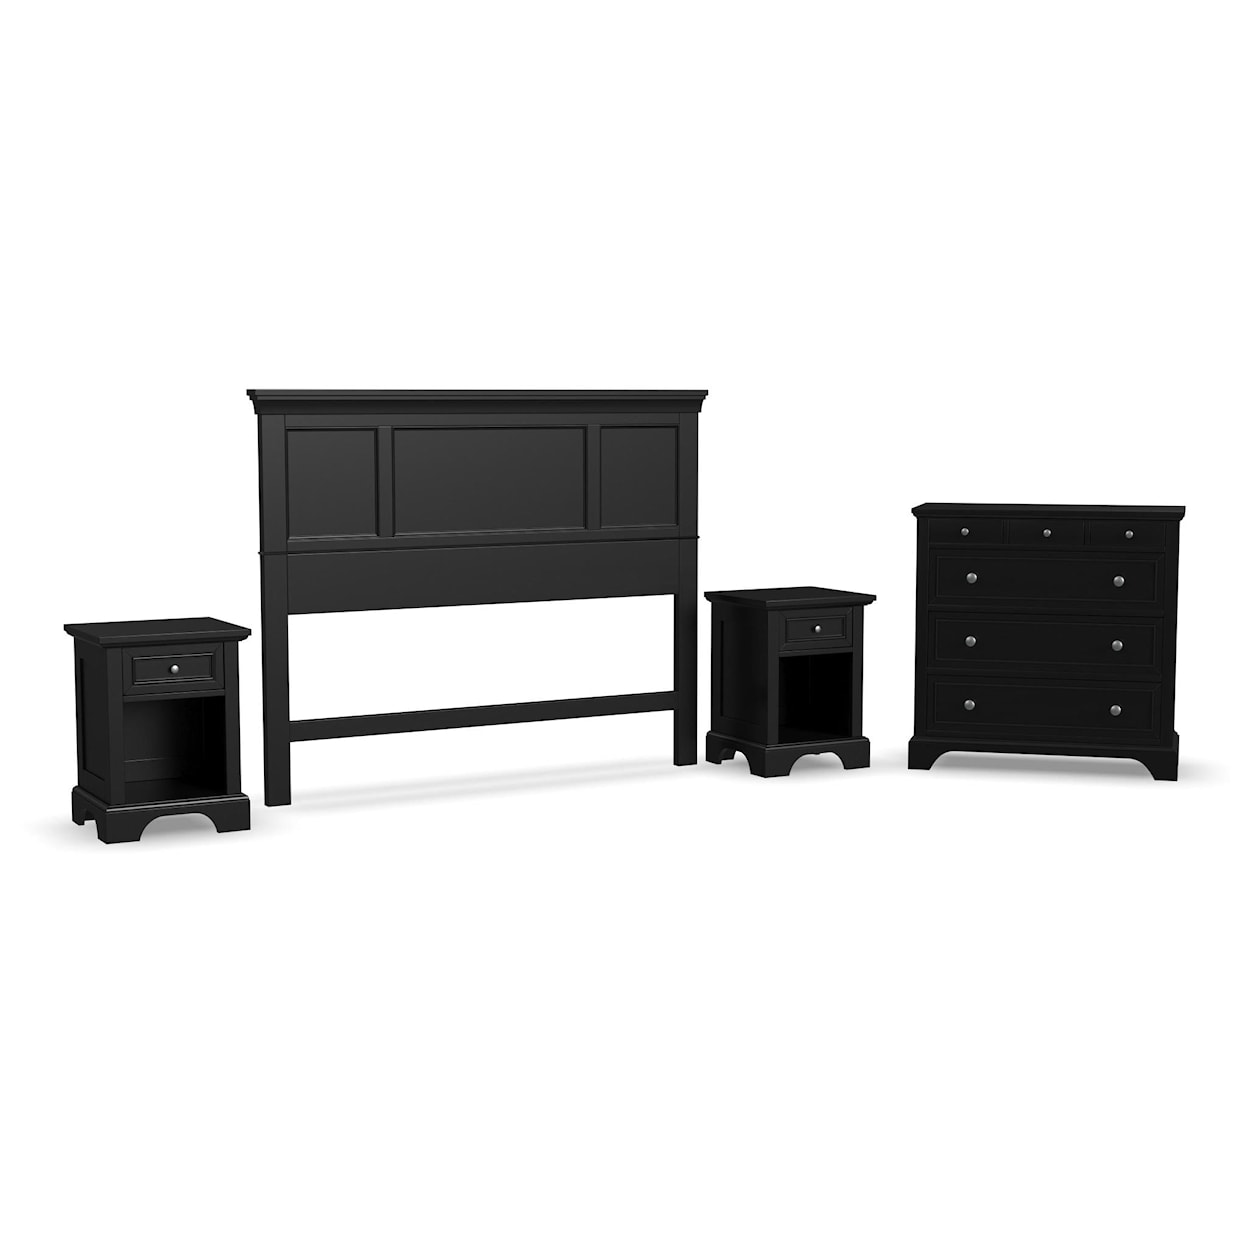 homestyles Ashford Queen Headboard, Two Nightstands and Chest